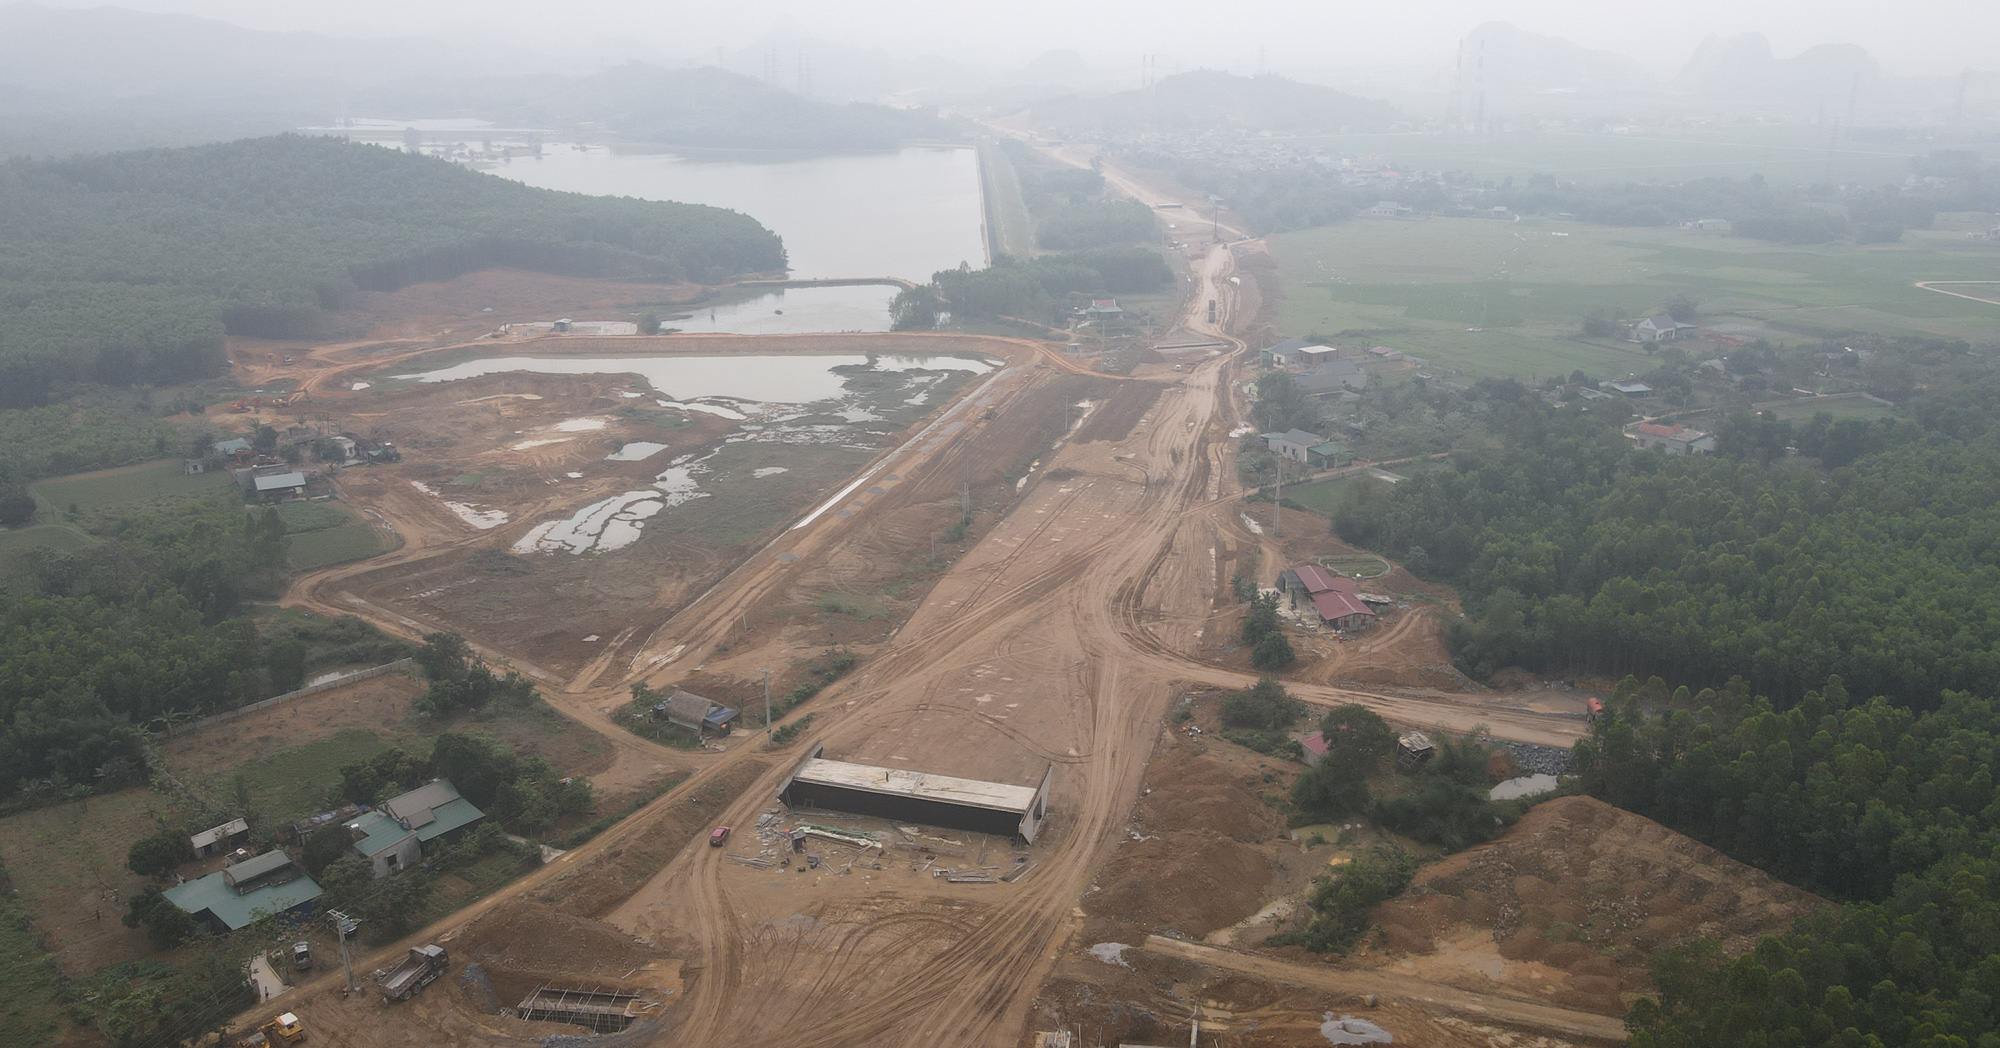 The North-South Expressway will complete the operation of 361 km in 2022